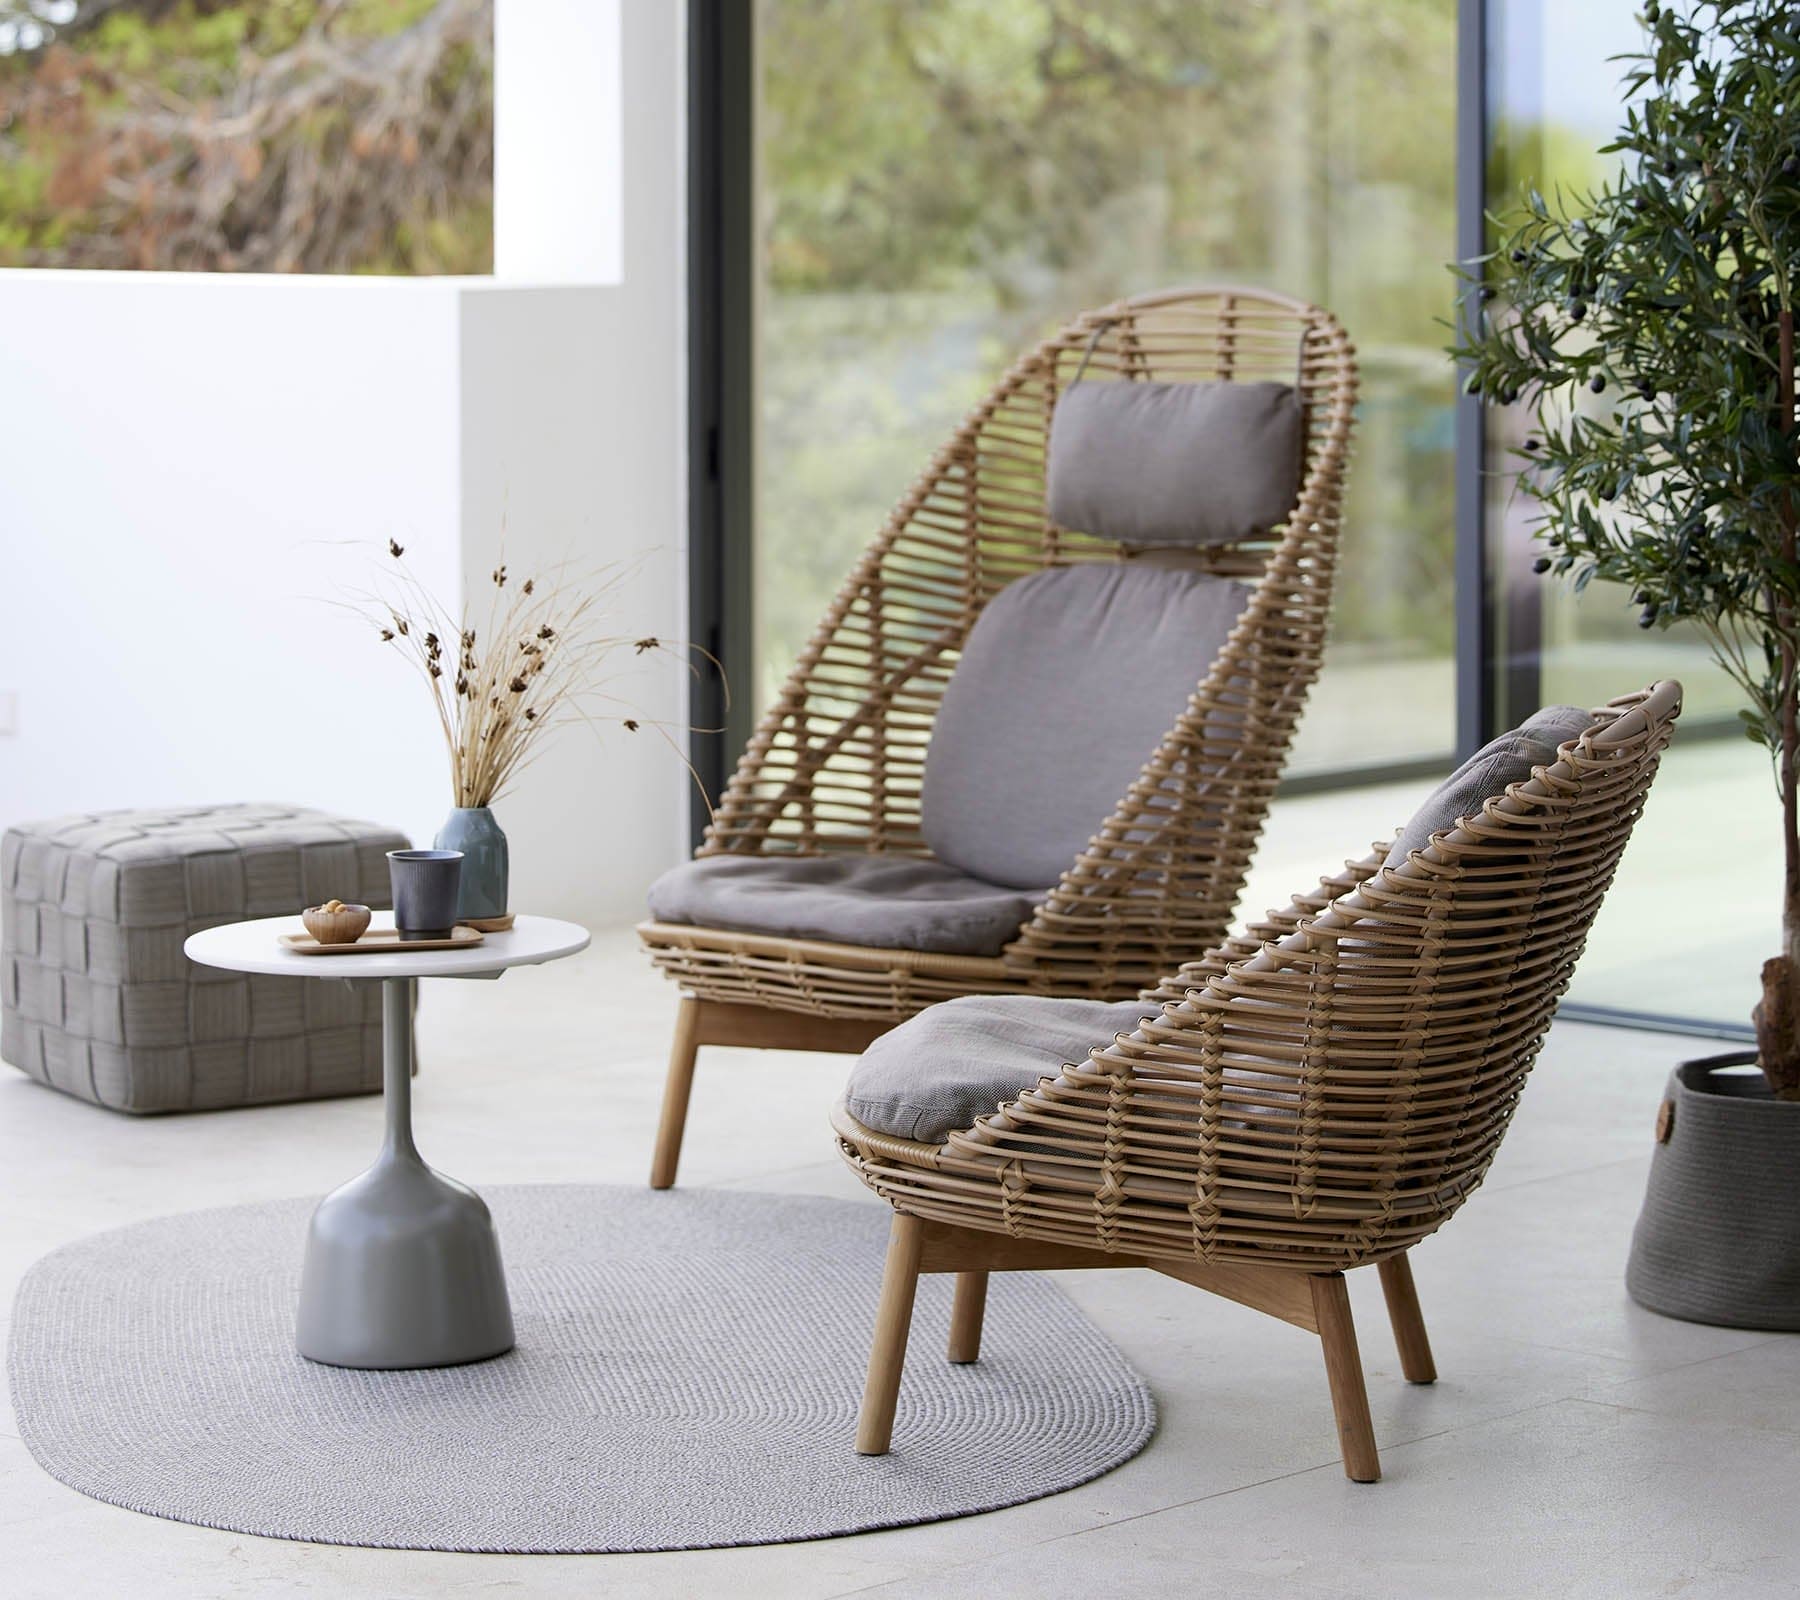 Boxhill's Hive Outdoor Lounge Chair lifestyle image with Hive Outdoor Highback Lounge chair and Glaze Outdoor Round Coffee Table